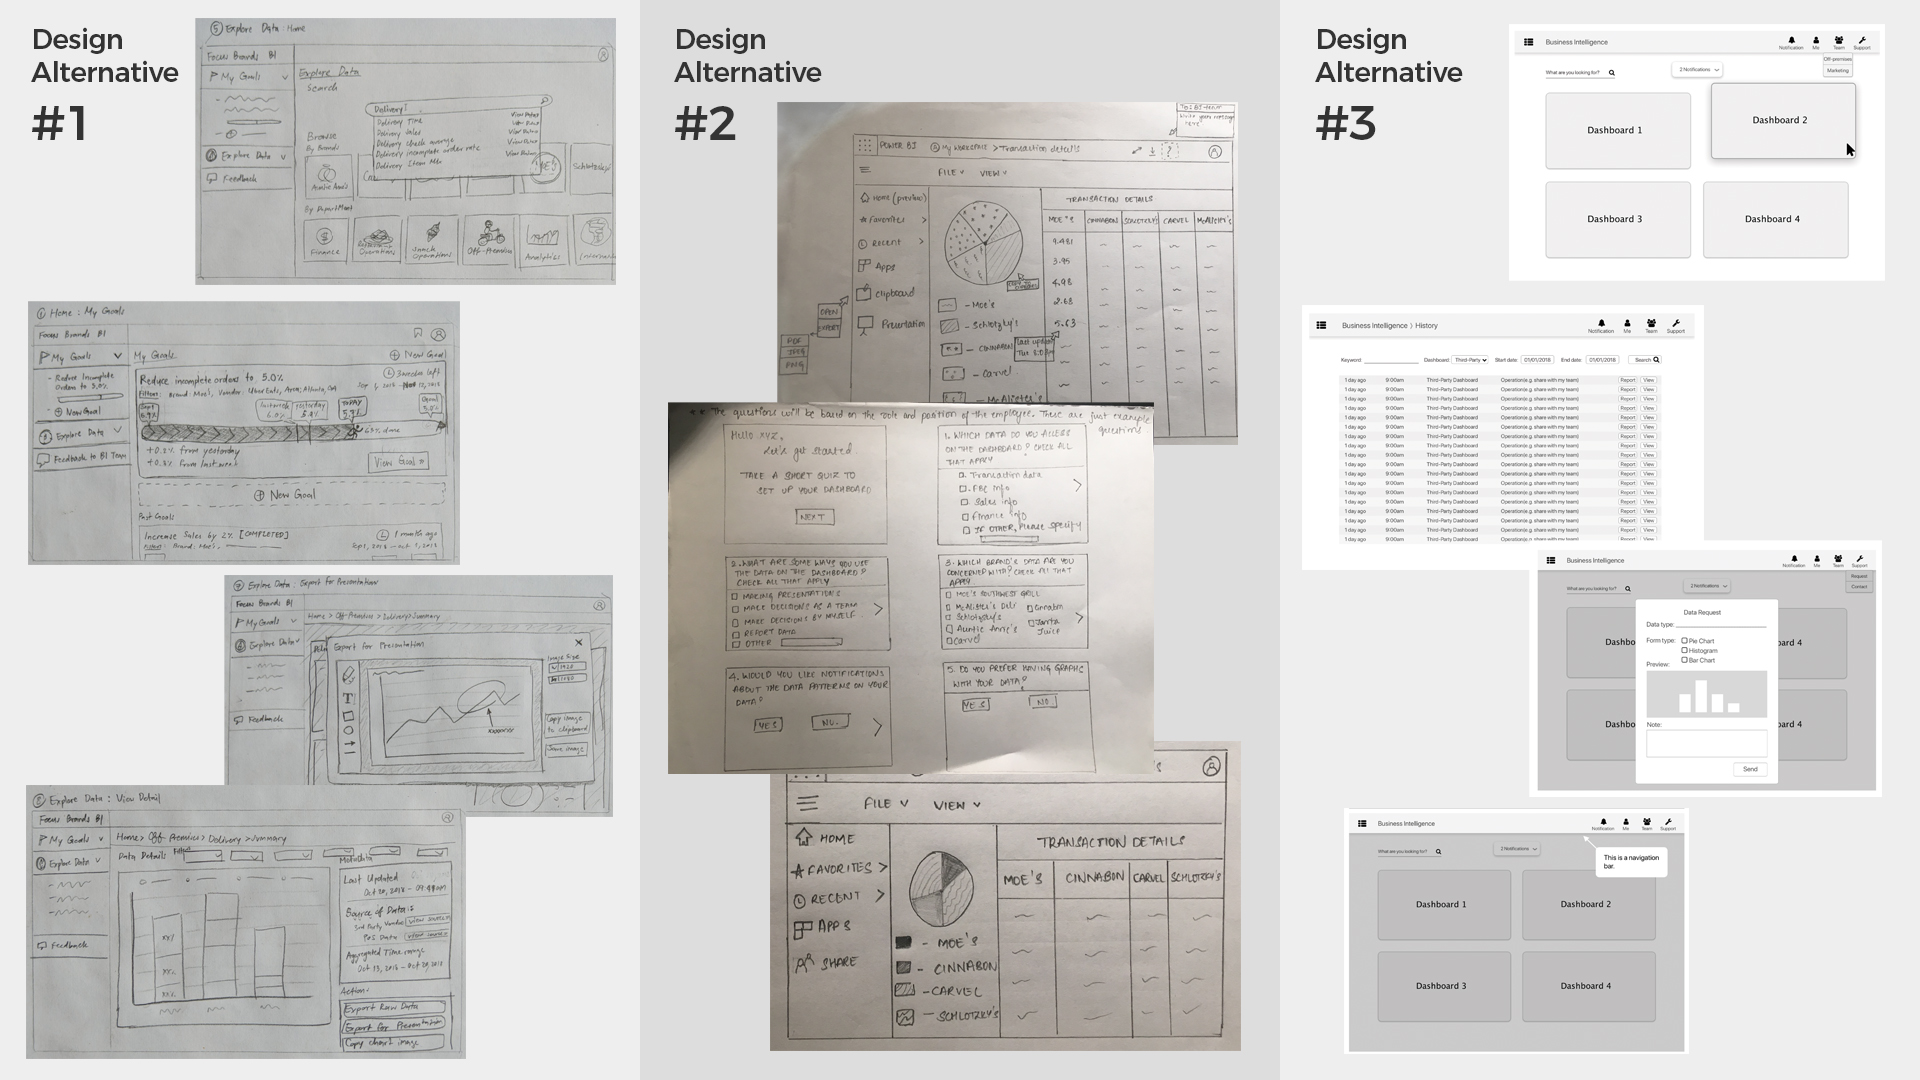 1st iteration in sketches and low-fidelity wireframes.